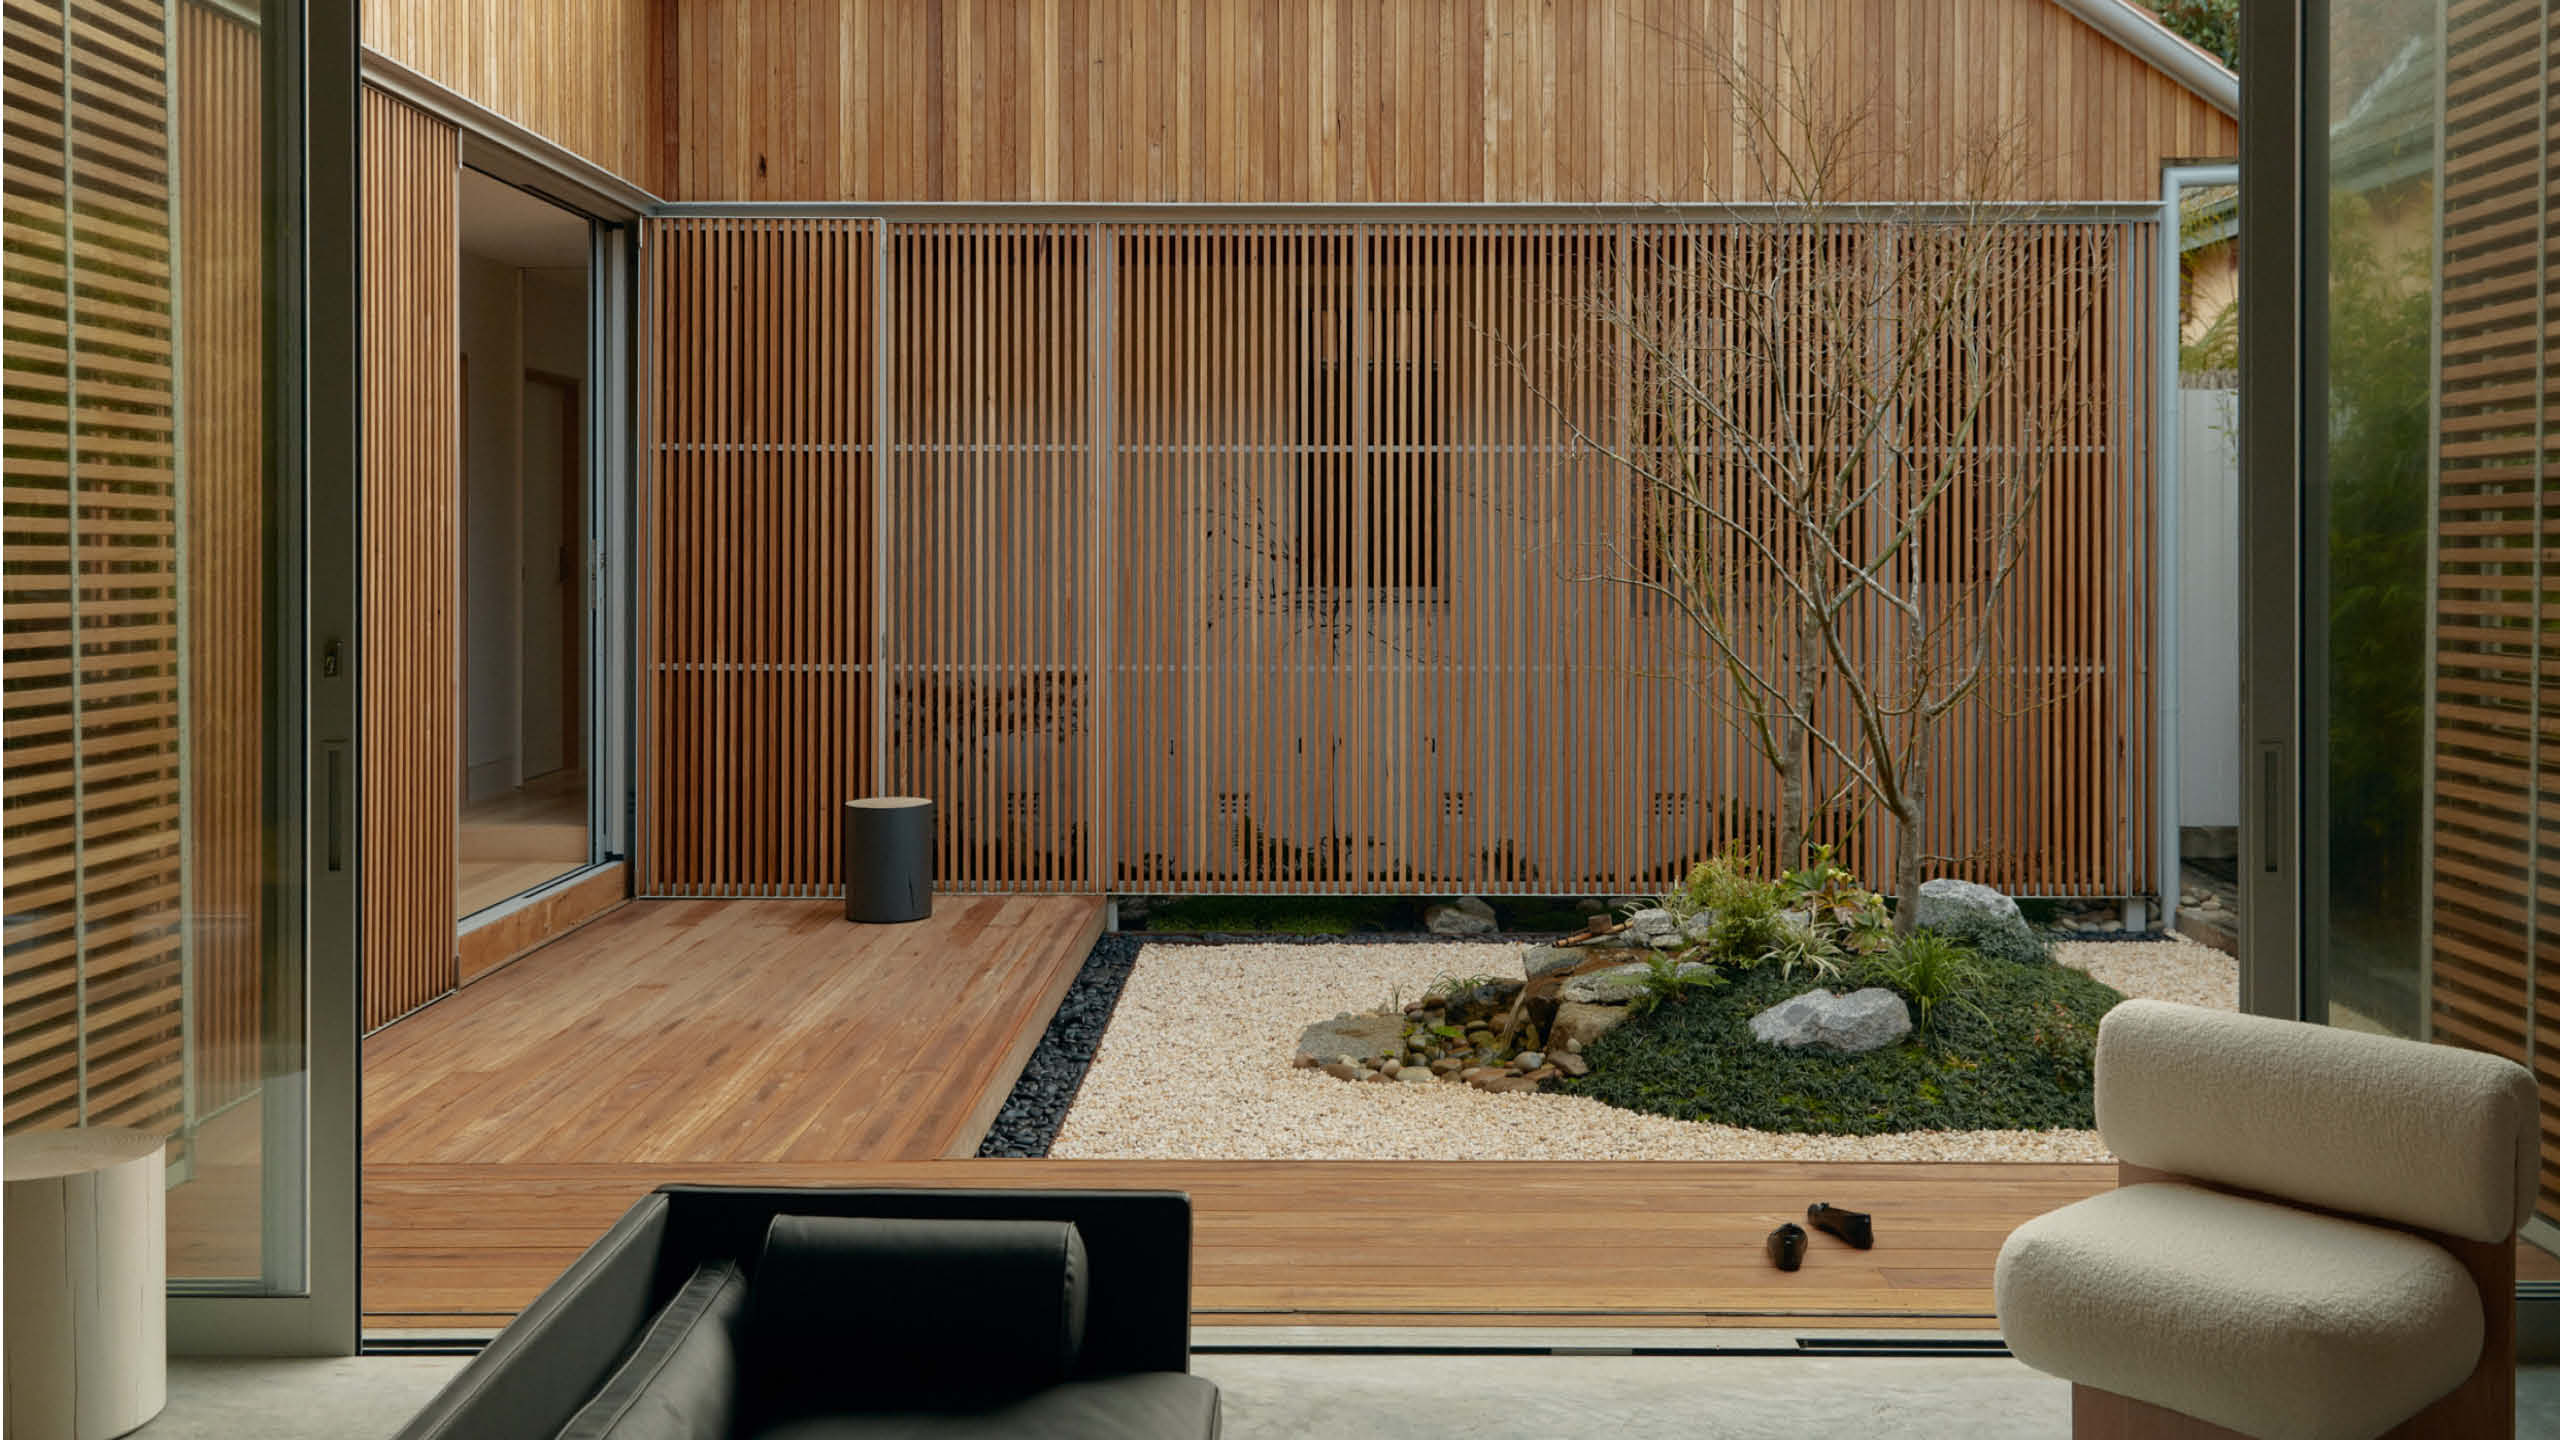 The Japanese maple tree in the middle of the Courtyard house is the house's spiritual center. Image by Tom Ross